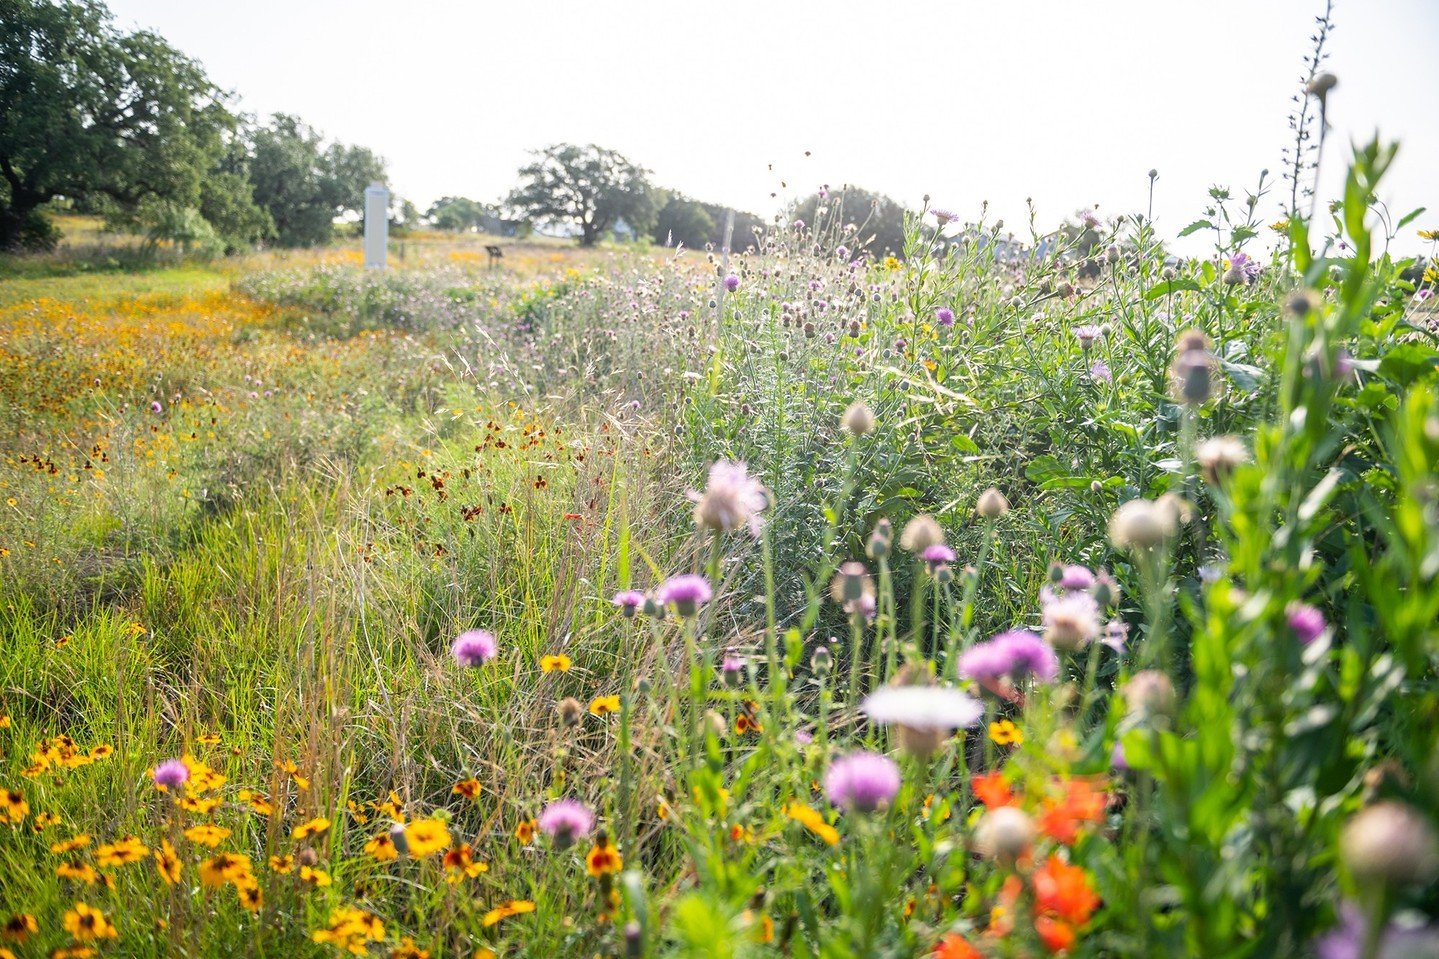 In celebration of spring rains and this beautiful Central Texas wildflower season, we&rsquo;re enjoying the progress of the prairie restoration at Horseshoe Bay Nature Park. ⁠
⁠
We were proud to lead the design development and construction of this ne